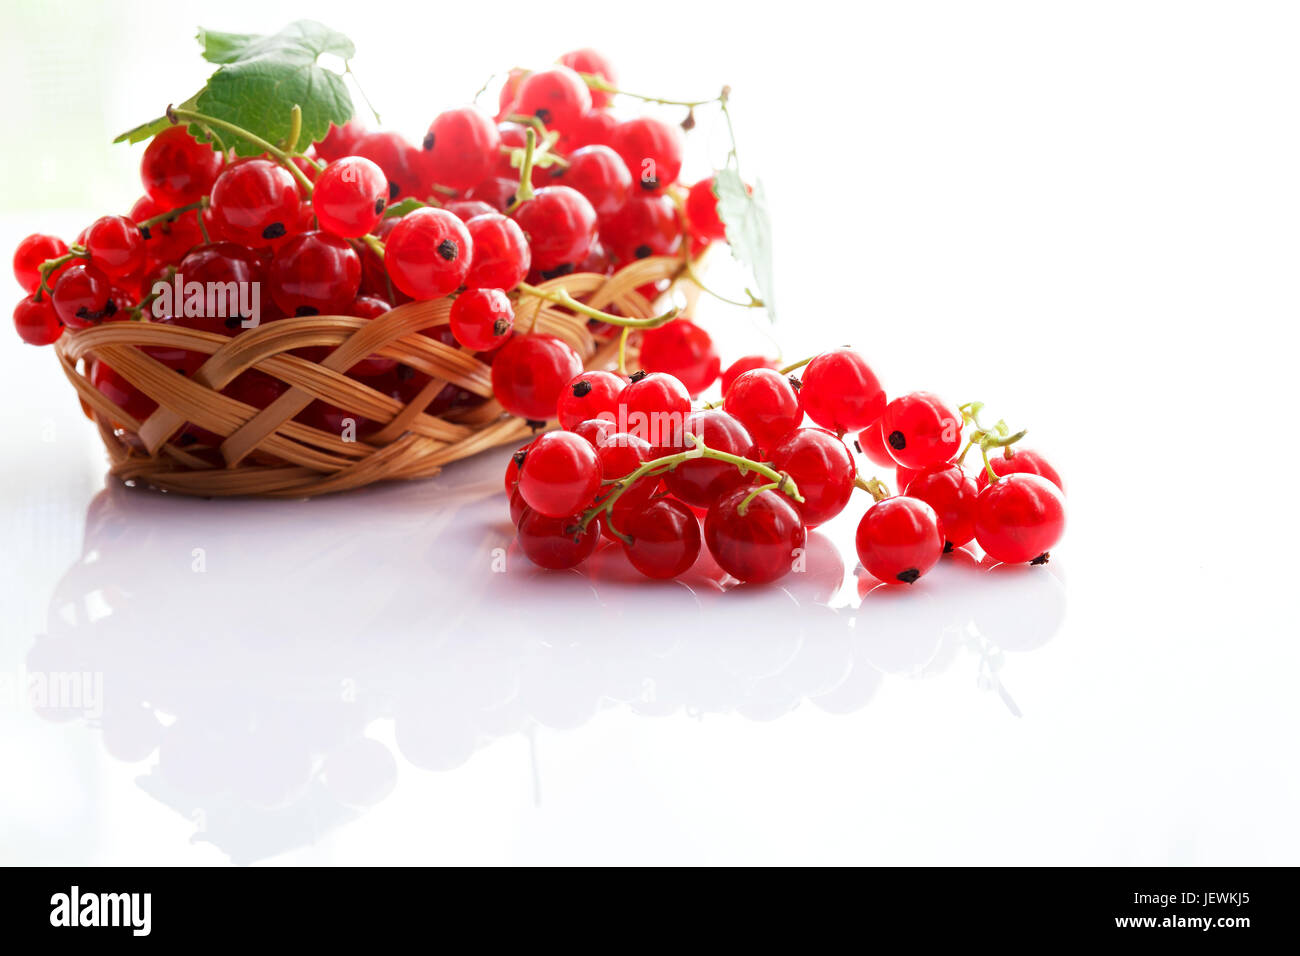 Fruits of red currants on a light background. Close-up Stock Photo